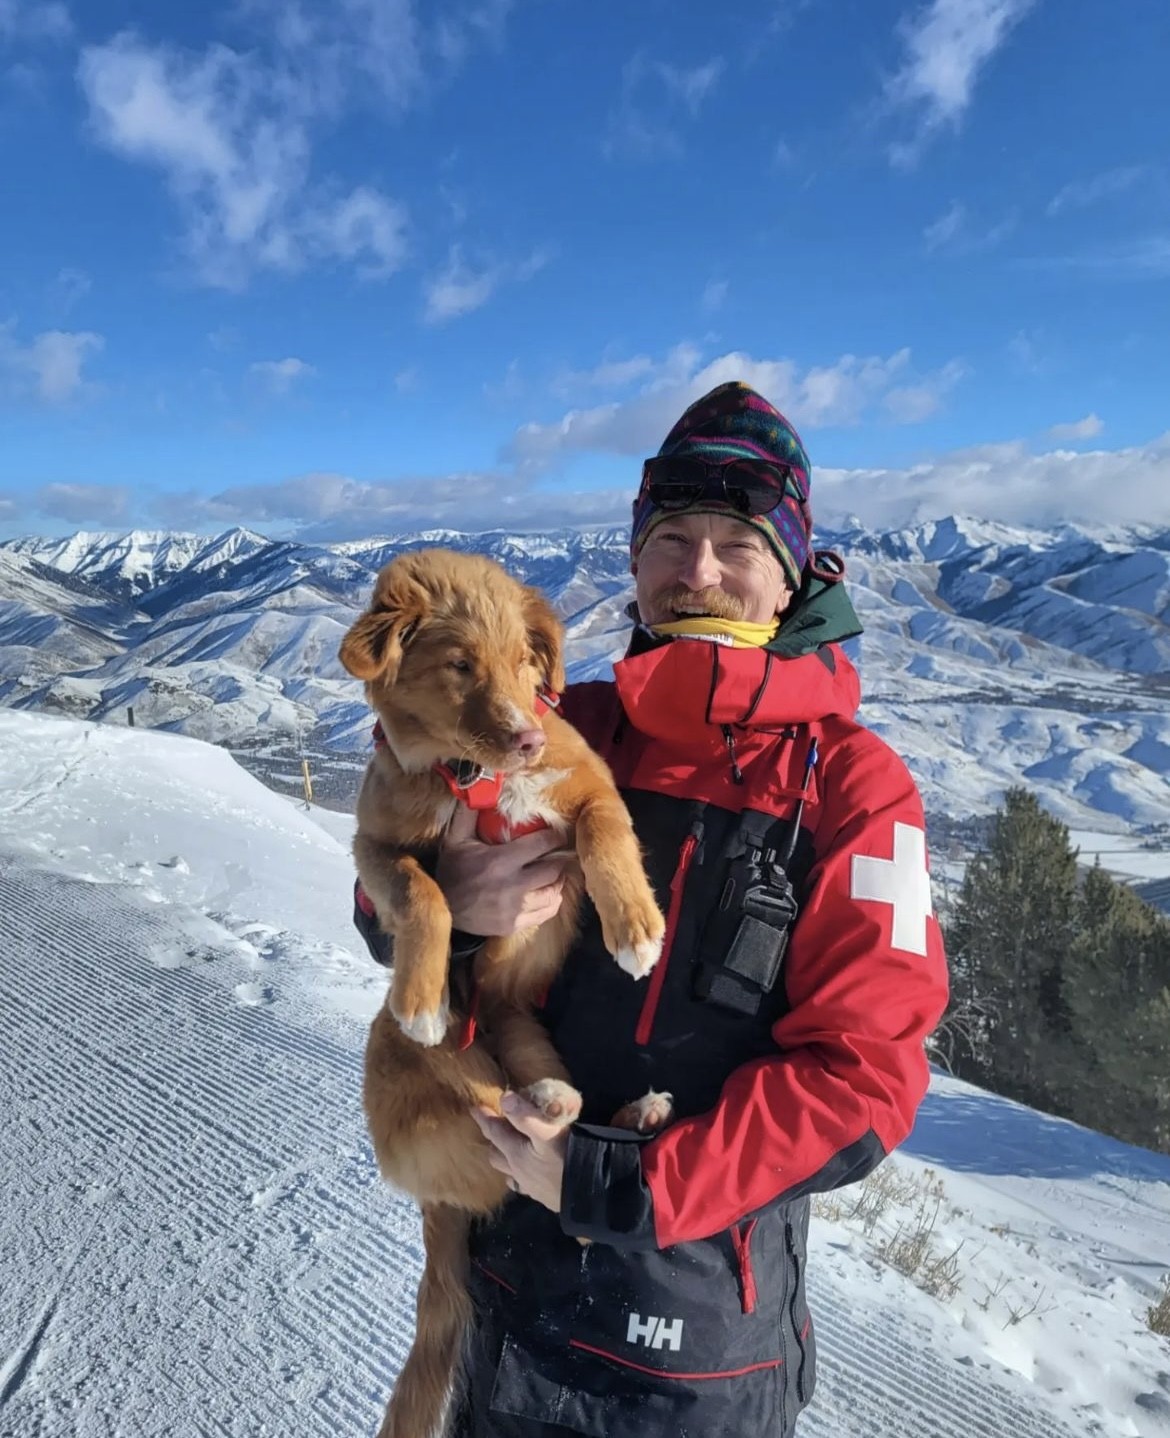 Kent, the Ski Patroller, poses holding his avalanche dog Wally.